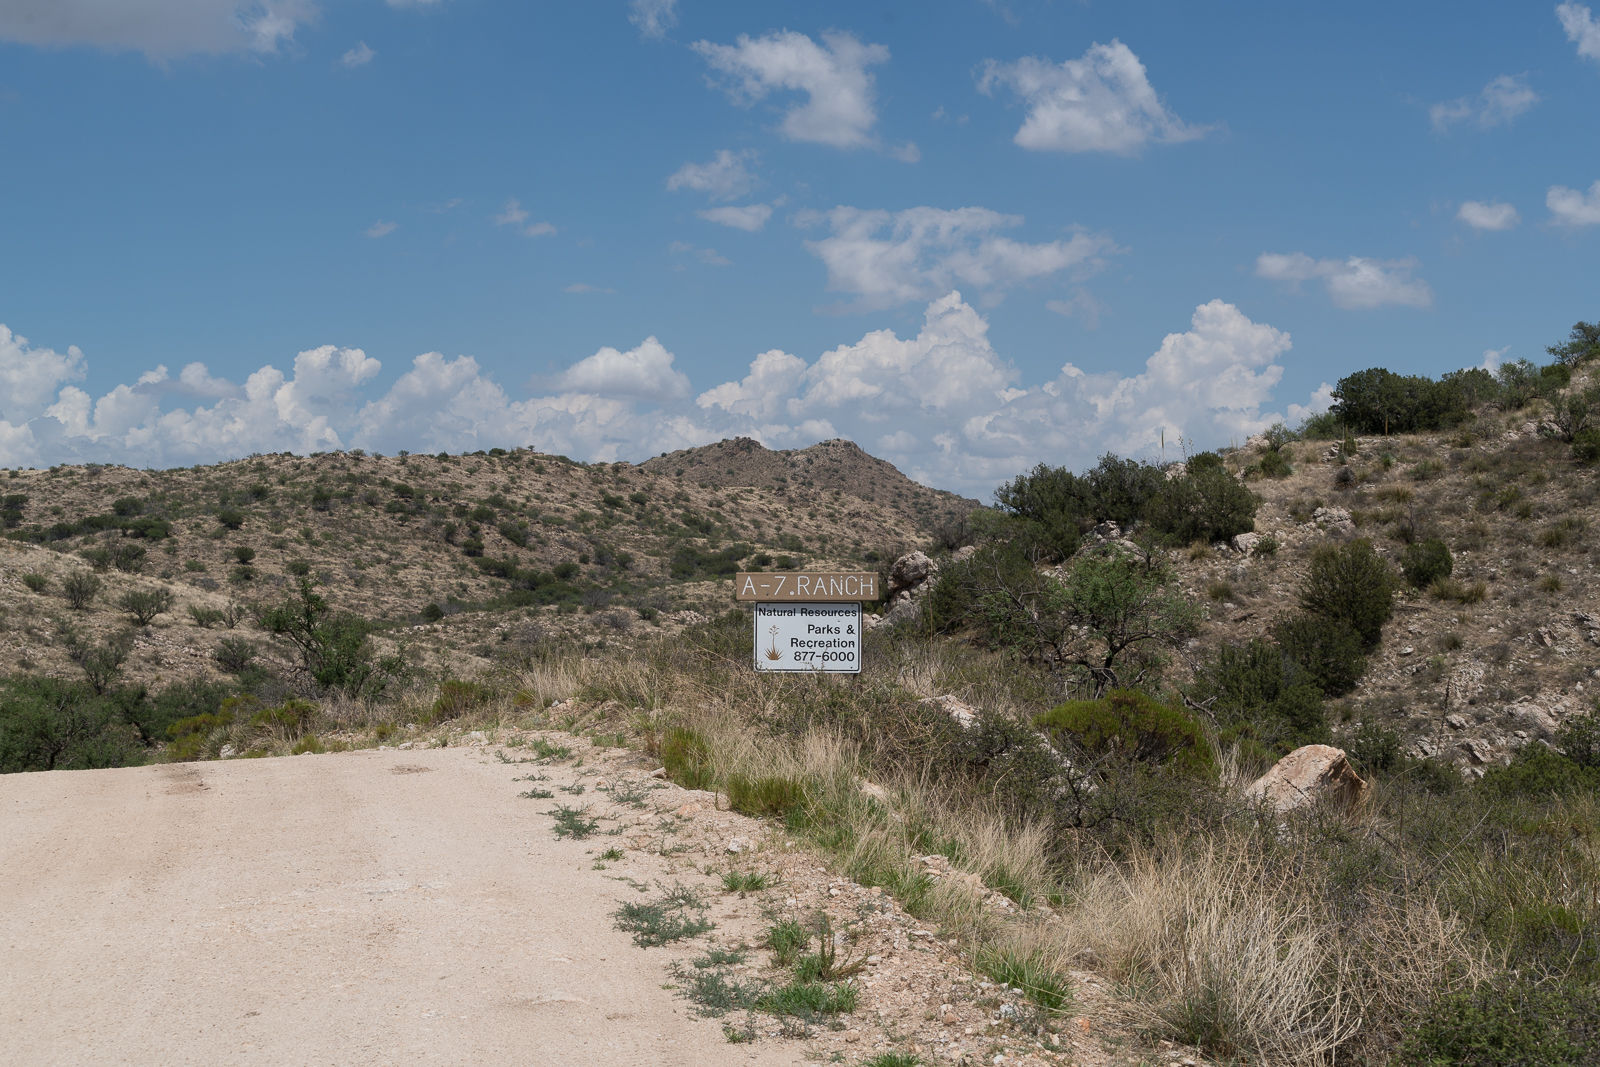 A sign on Redington Road marking the boundary of Pima County's A-7 Ranch. July 2016.